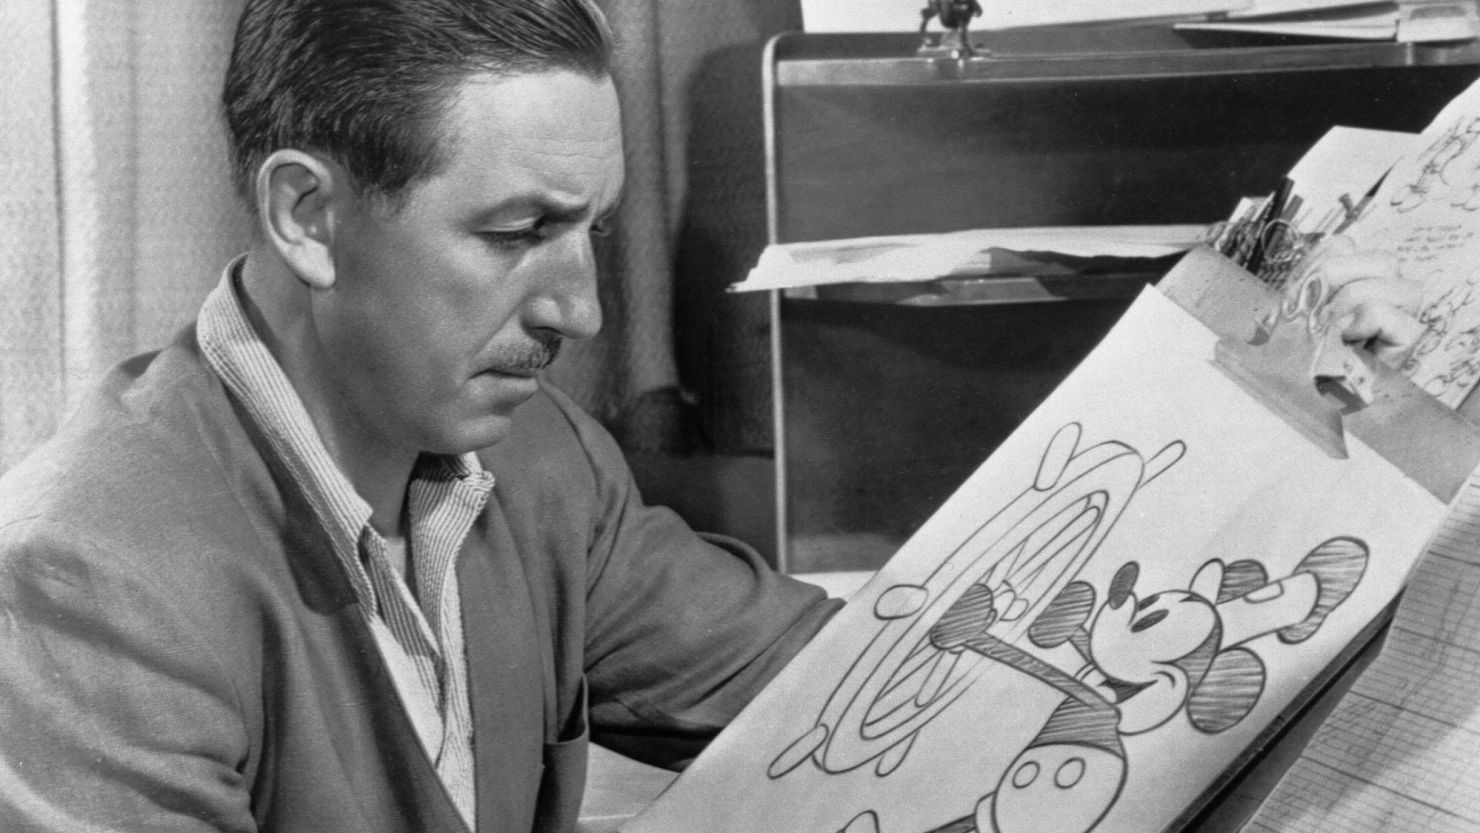 An early version of Disney's Mickey Mouse will enter the public domain on  January 1